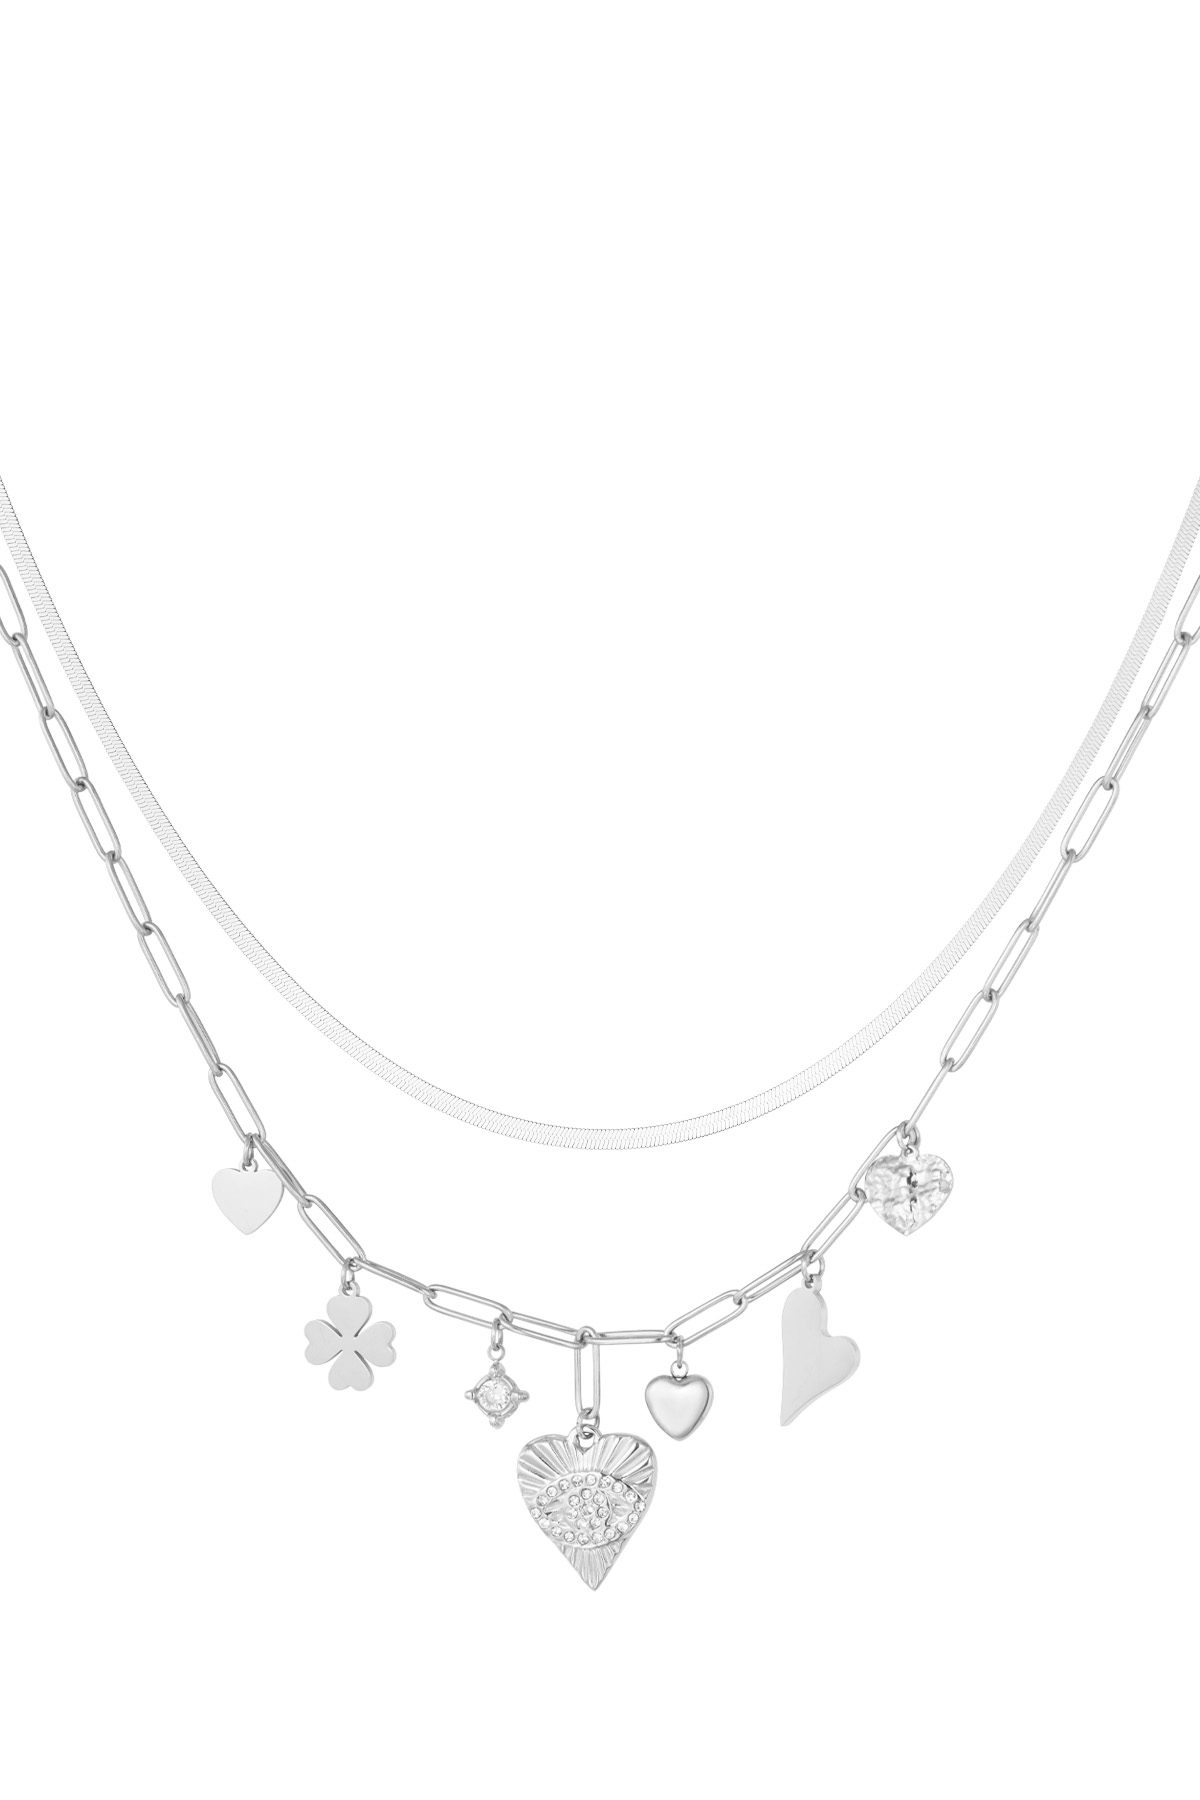 Charm necklace lucky number 7 - silver